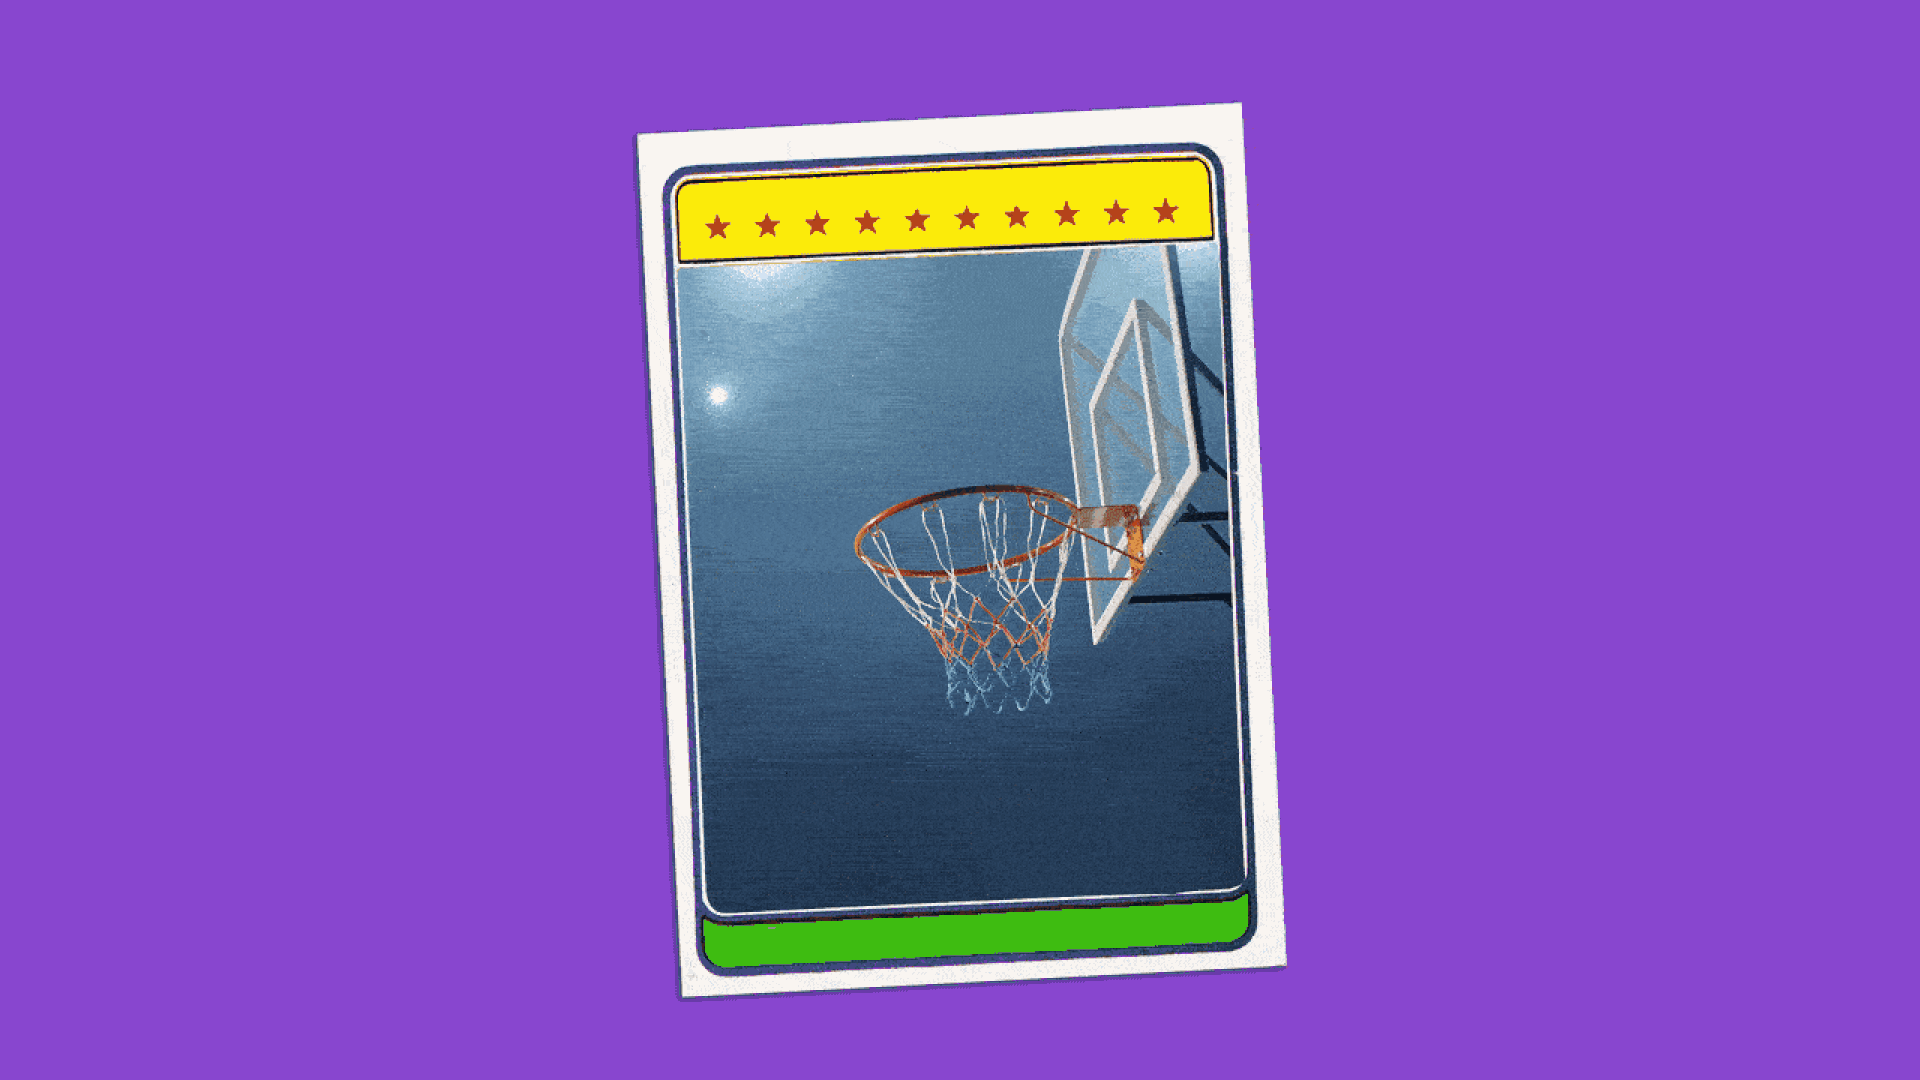 GIF of a person dunking a basketball into a hoop.